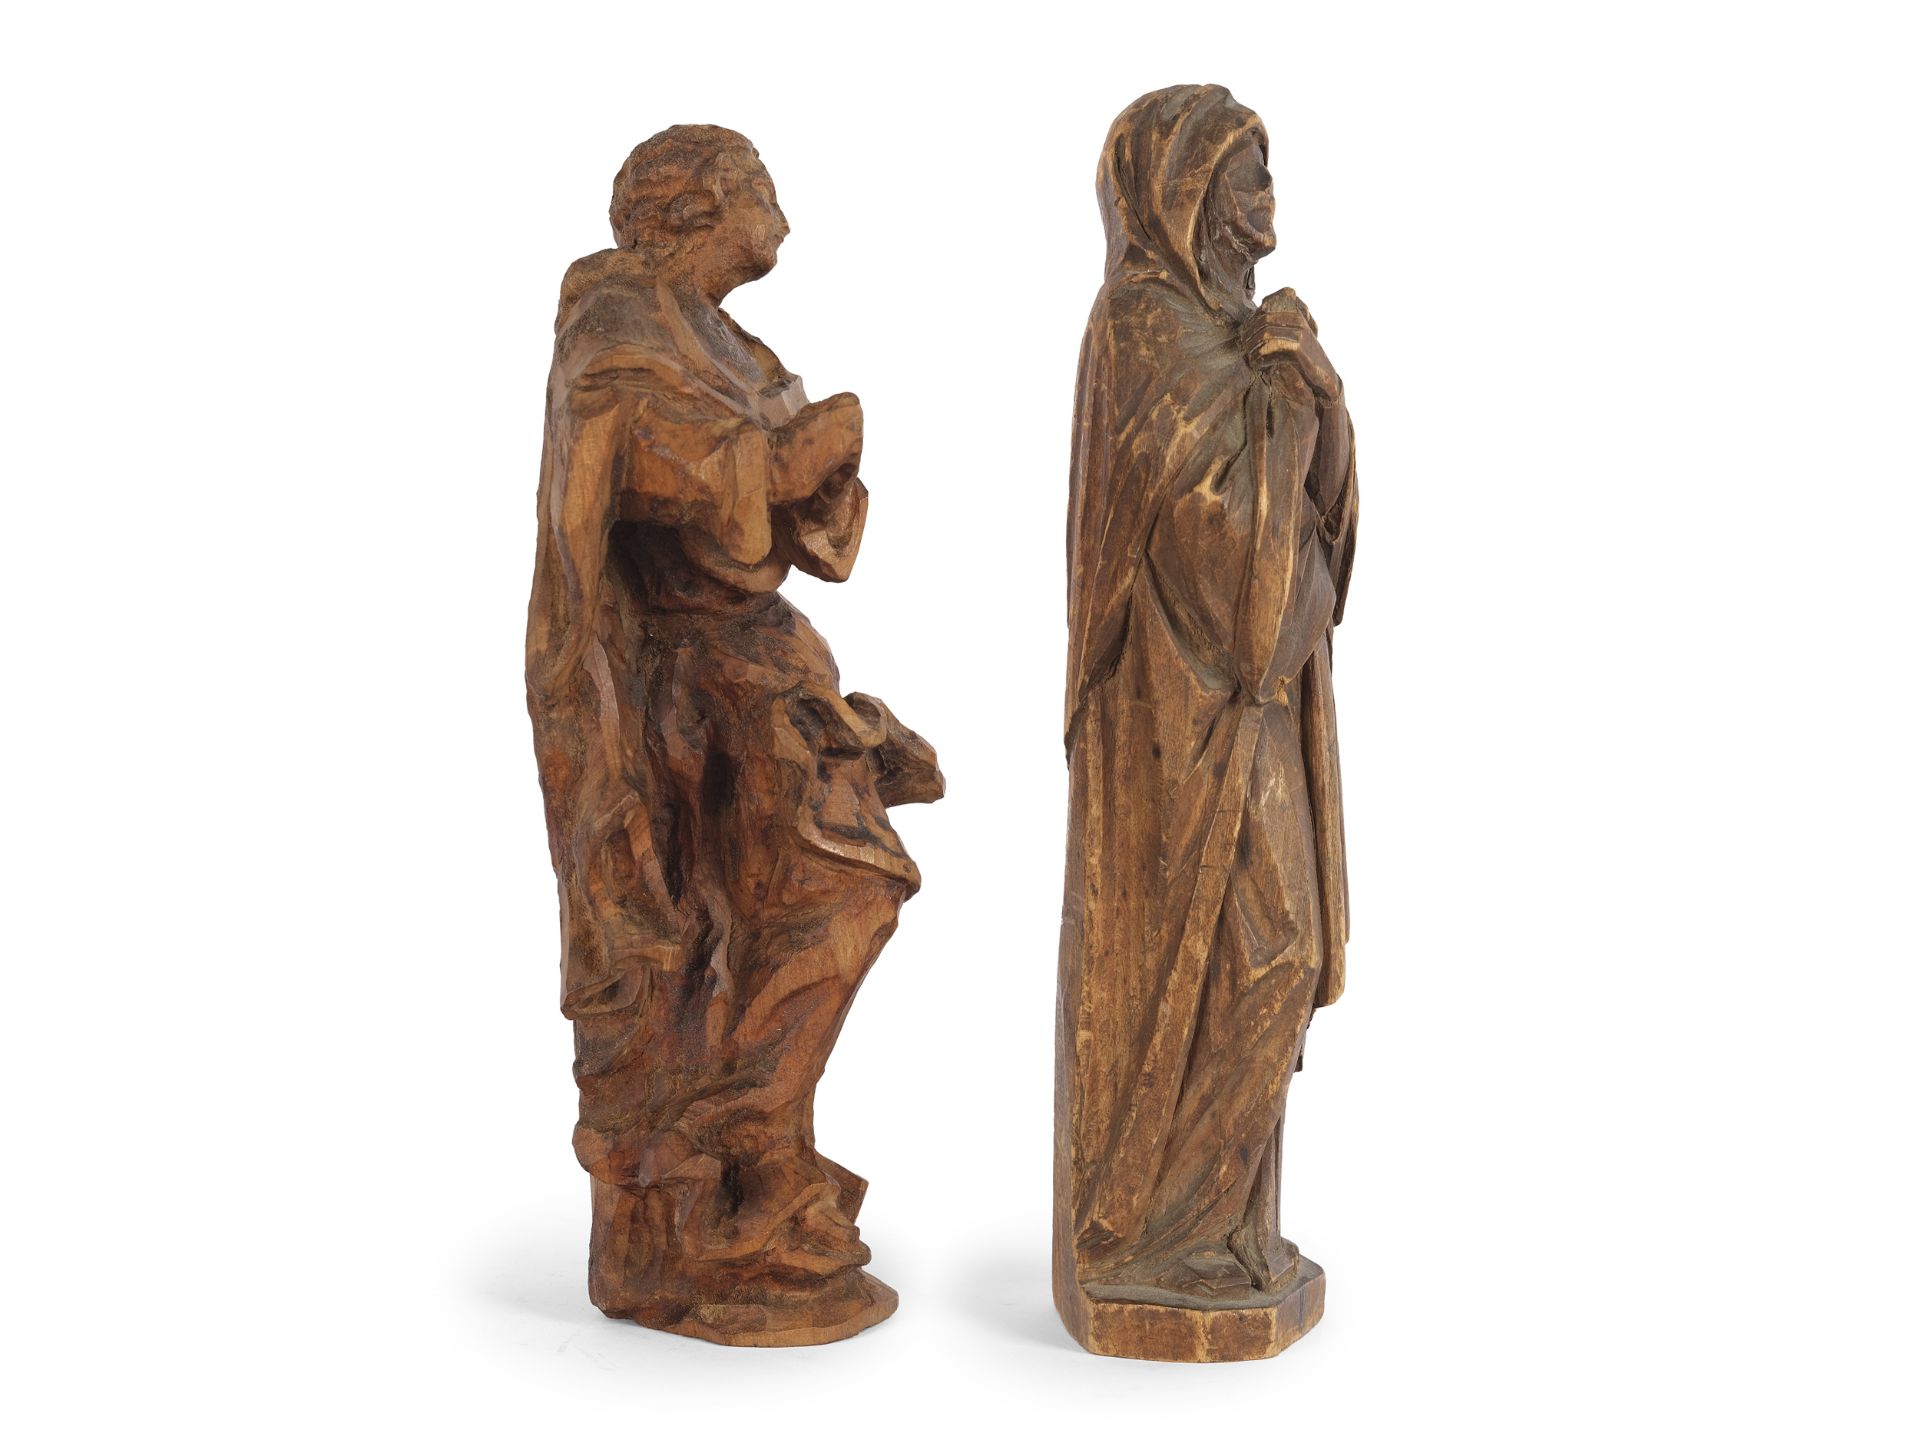 Pair of figures, Mary as Virgin and mourning Mary, 19th century? - Image 4 of 5